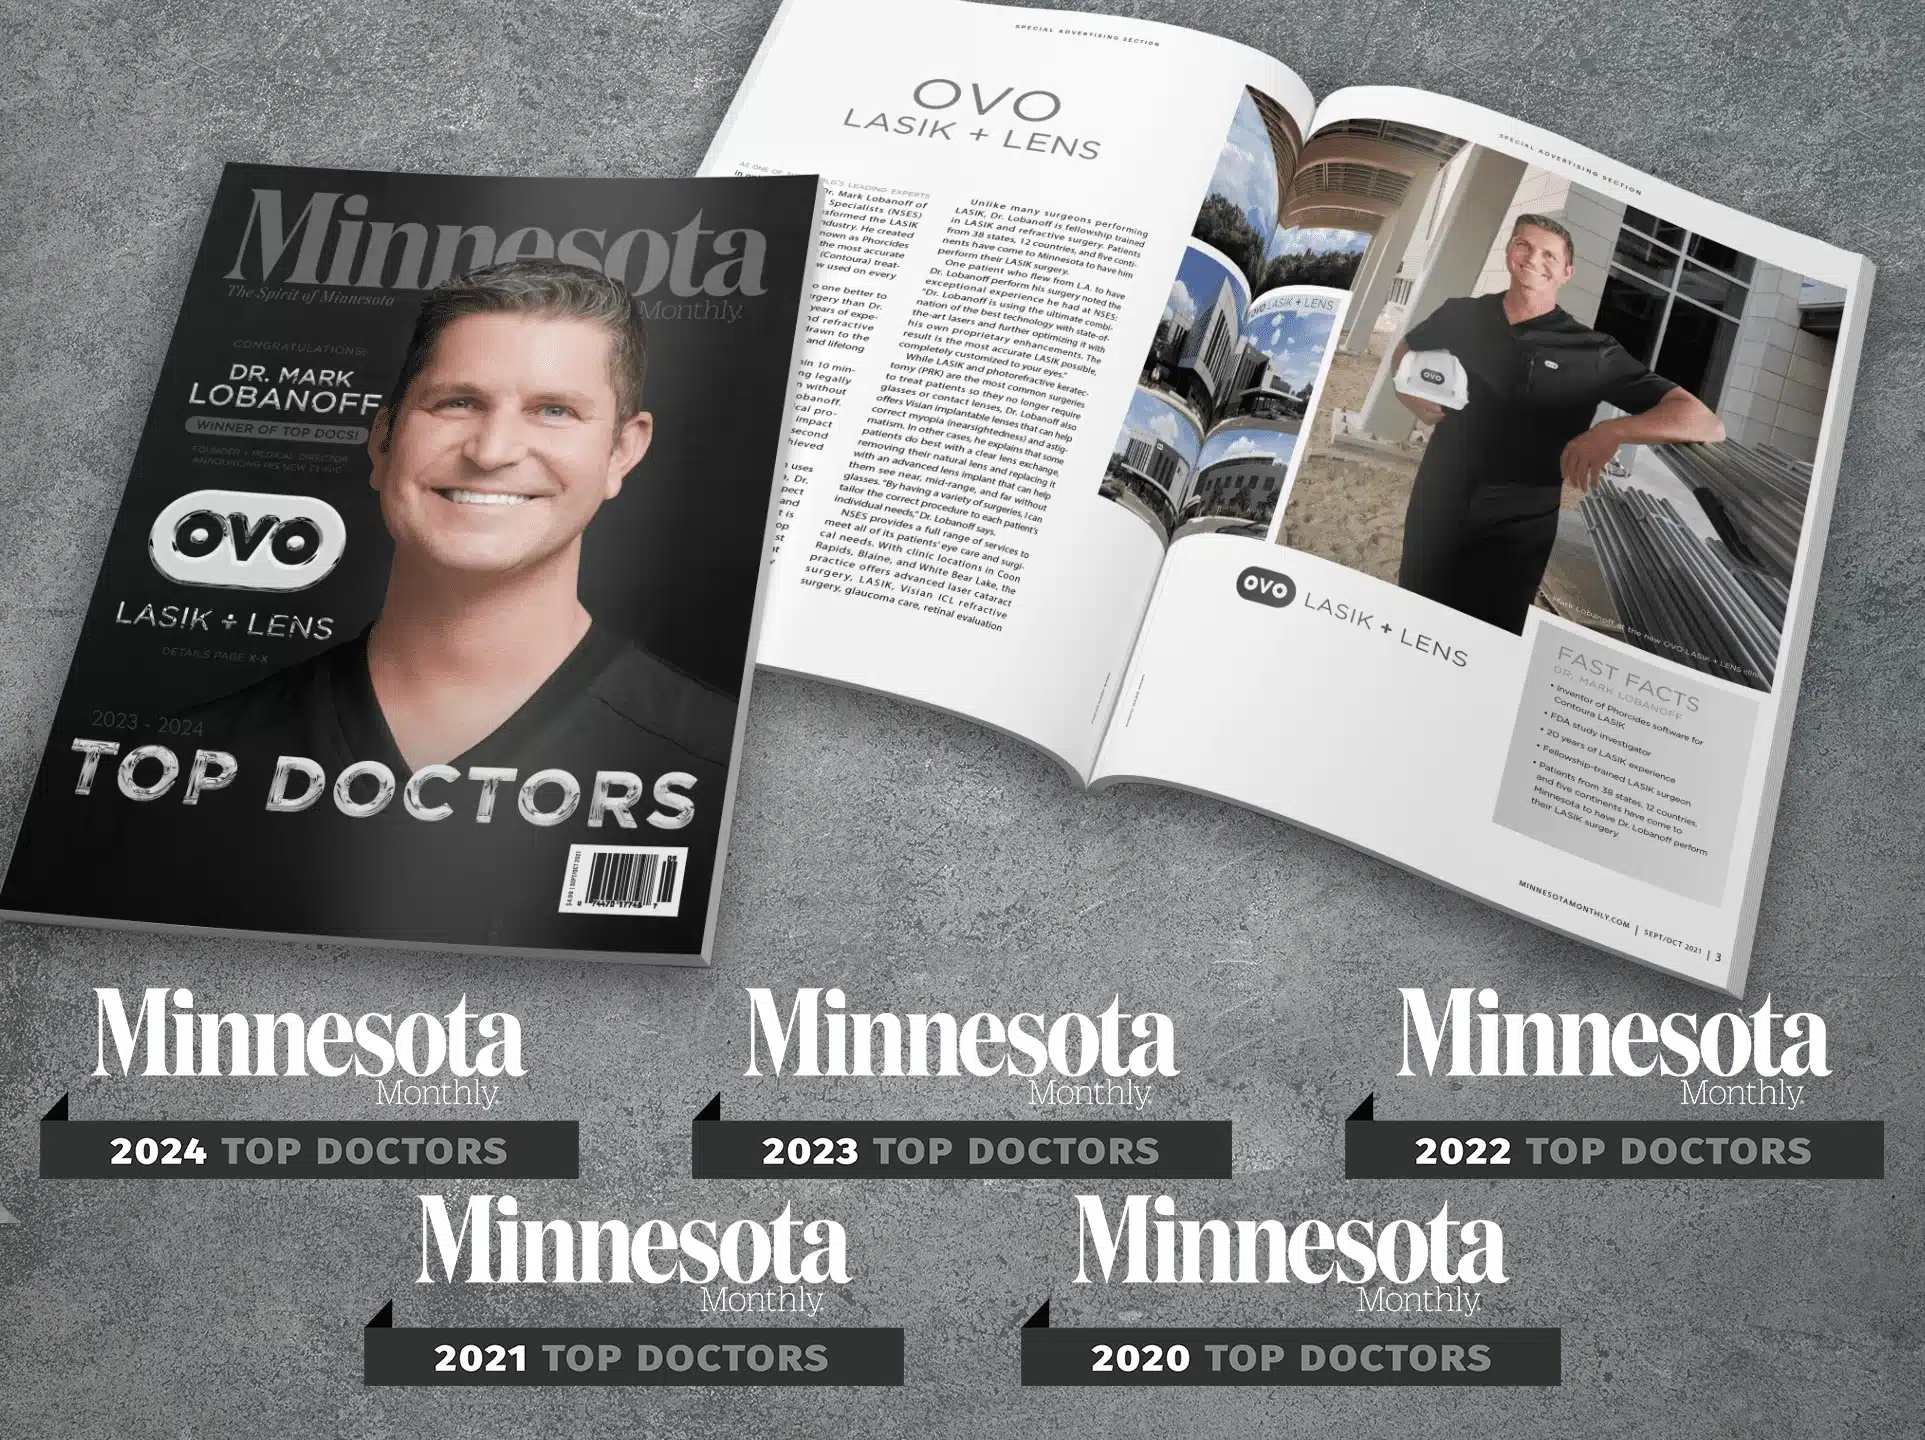 The new OVO lasik+lens based in Minneapolis, mn. OVO was founded by dr. Lobanoff, the award winning lasik doctor.